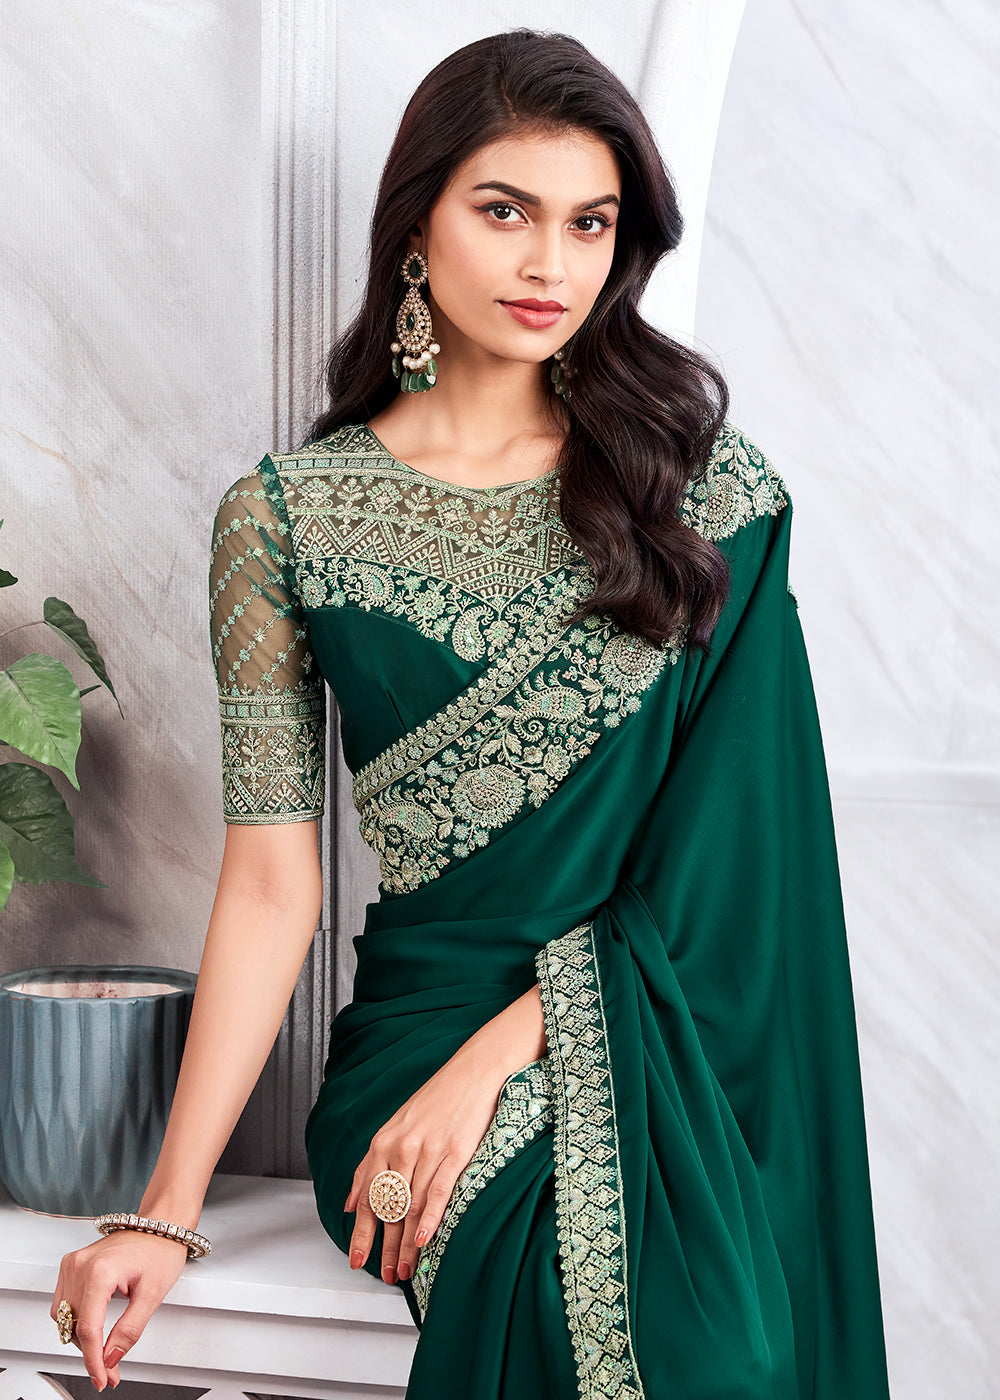 Buy Now Lovely Bottle Green Silk Embroidered Designer Saree Online in USA, UK, Canada & Worldwide at Empress Clothing.